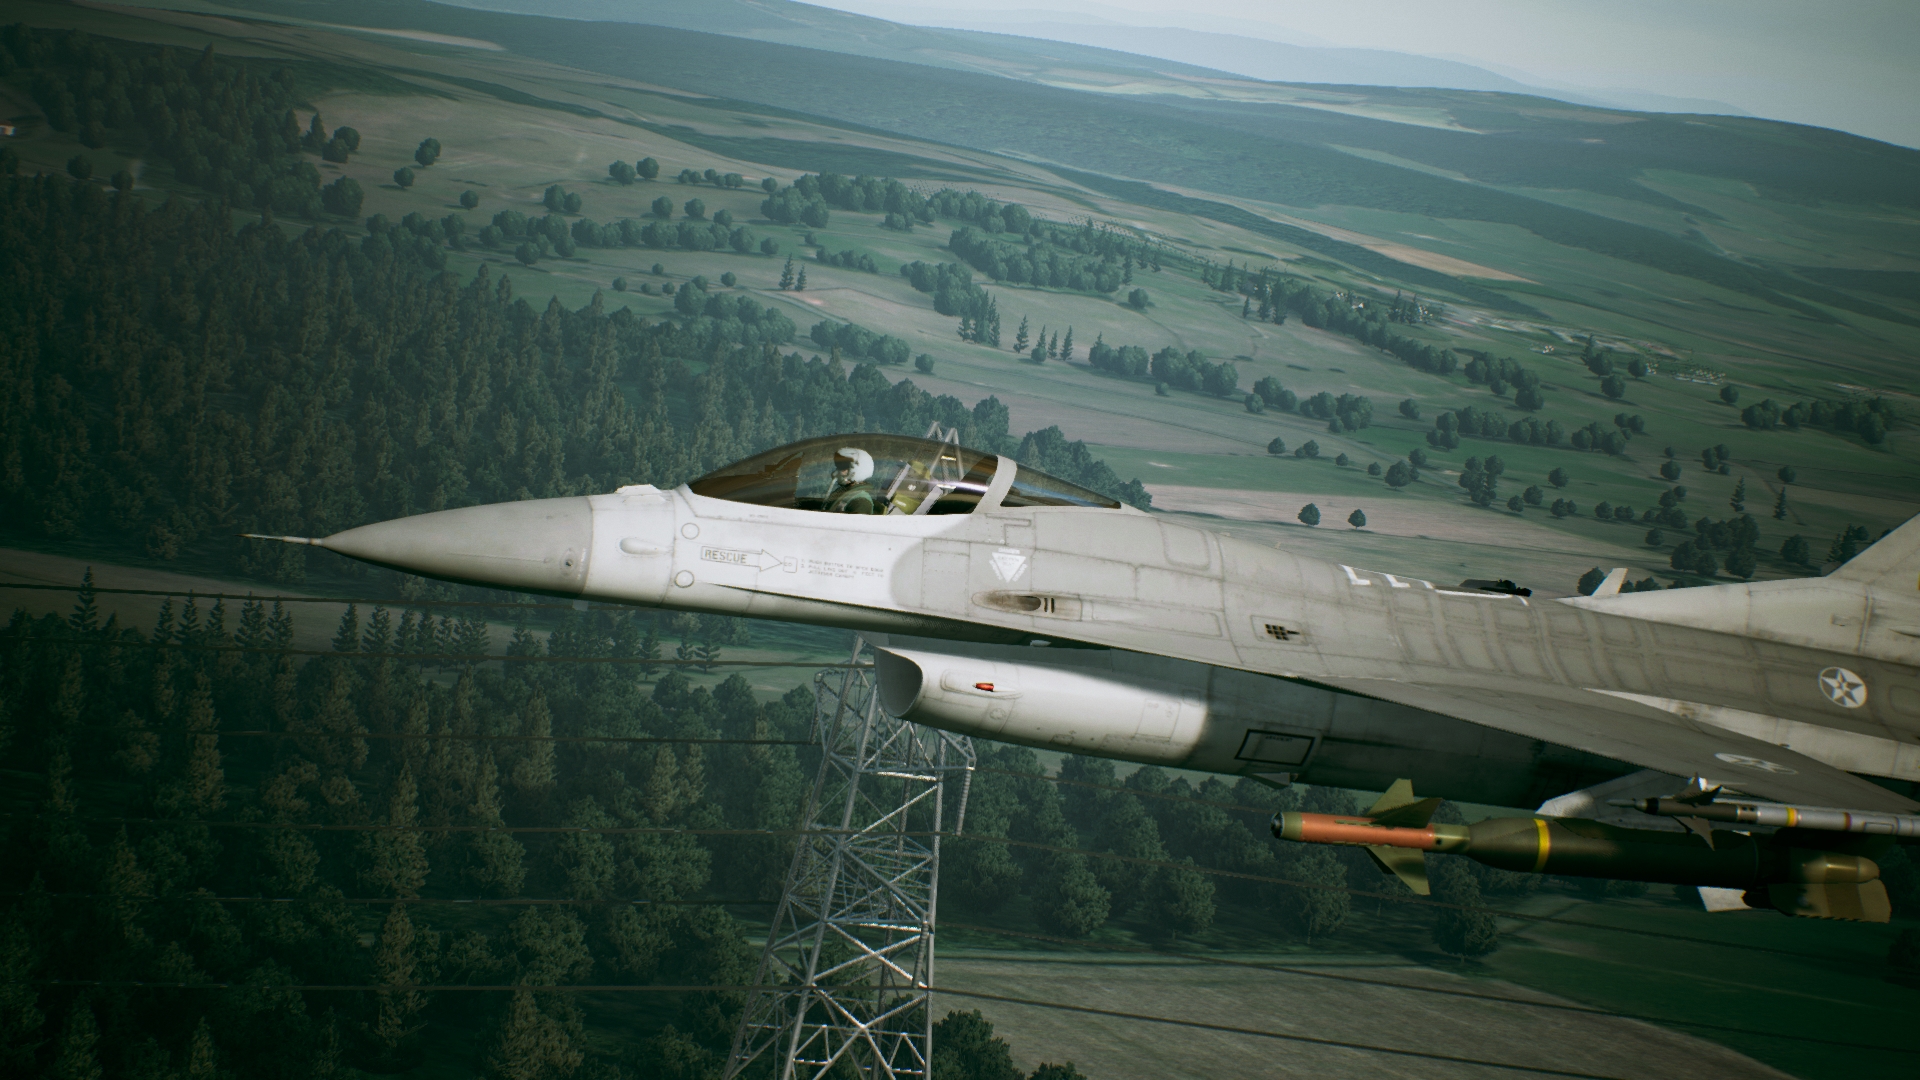 Ace Combat 7: Skies Unknown- Review and reflection at the ¾ mark